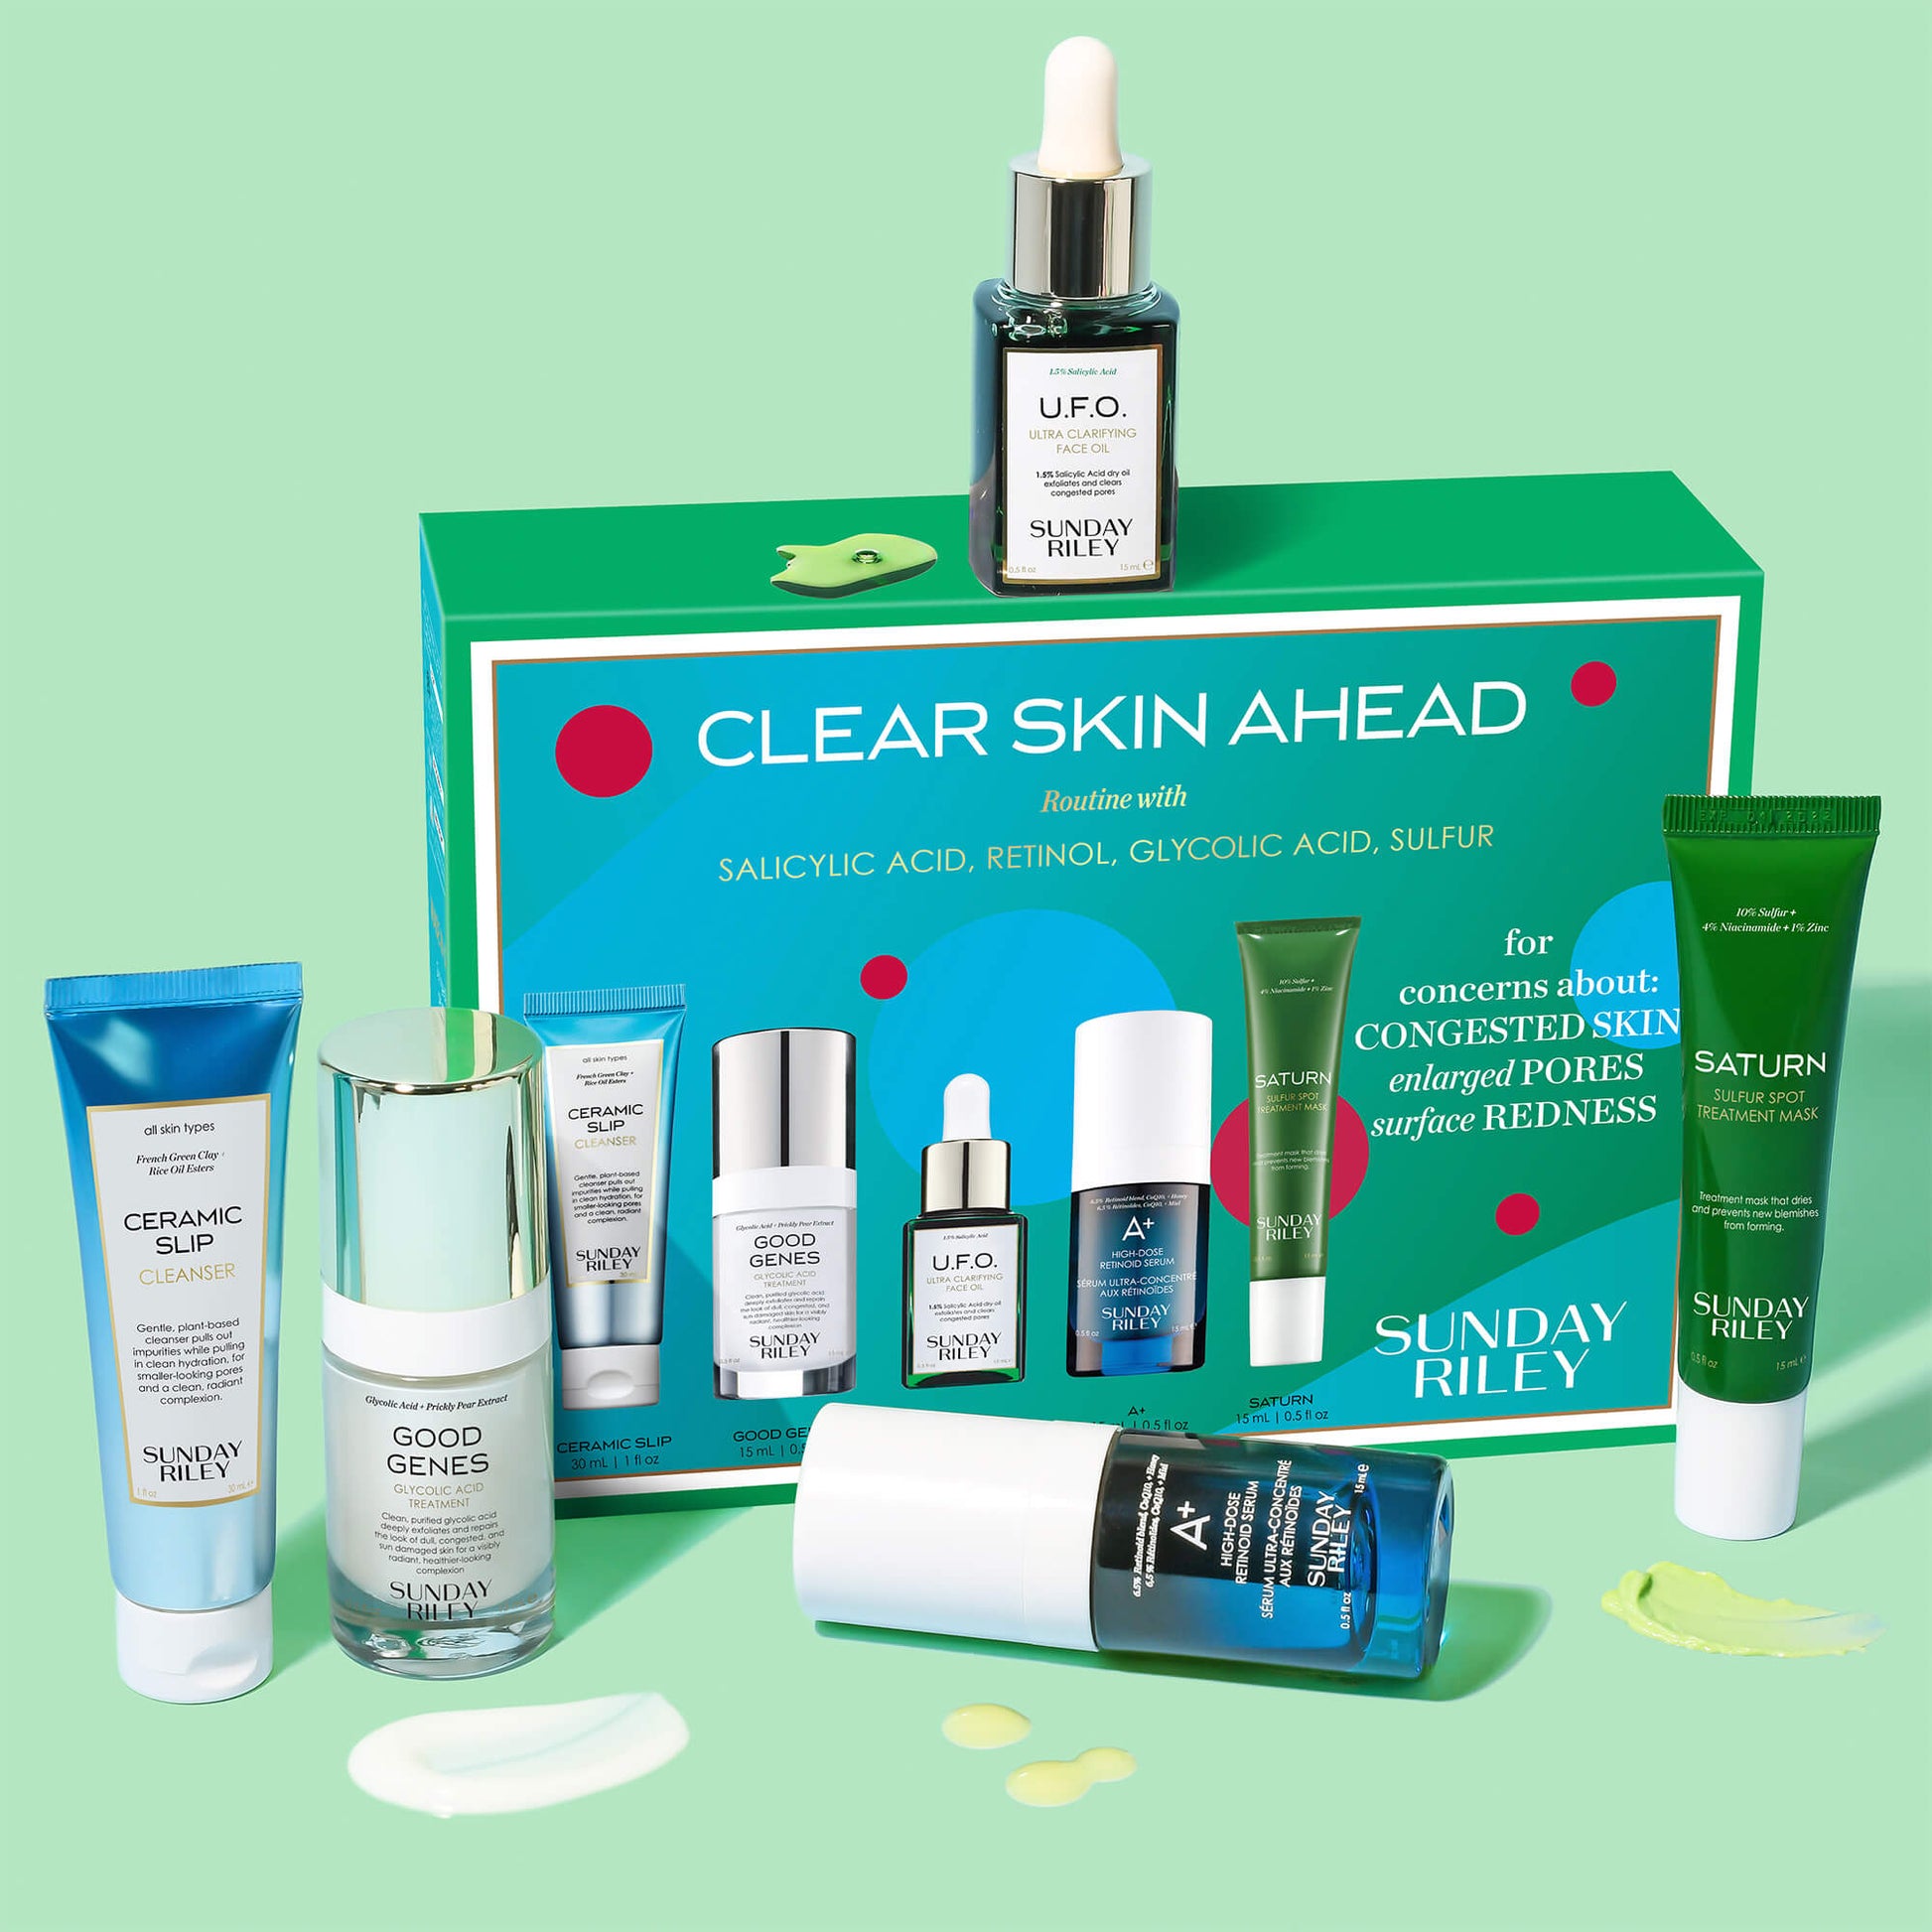 Clear Skin Ahead kit on a light green background with product bottles and some goops around it